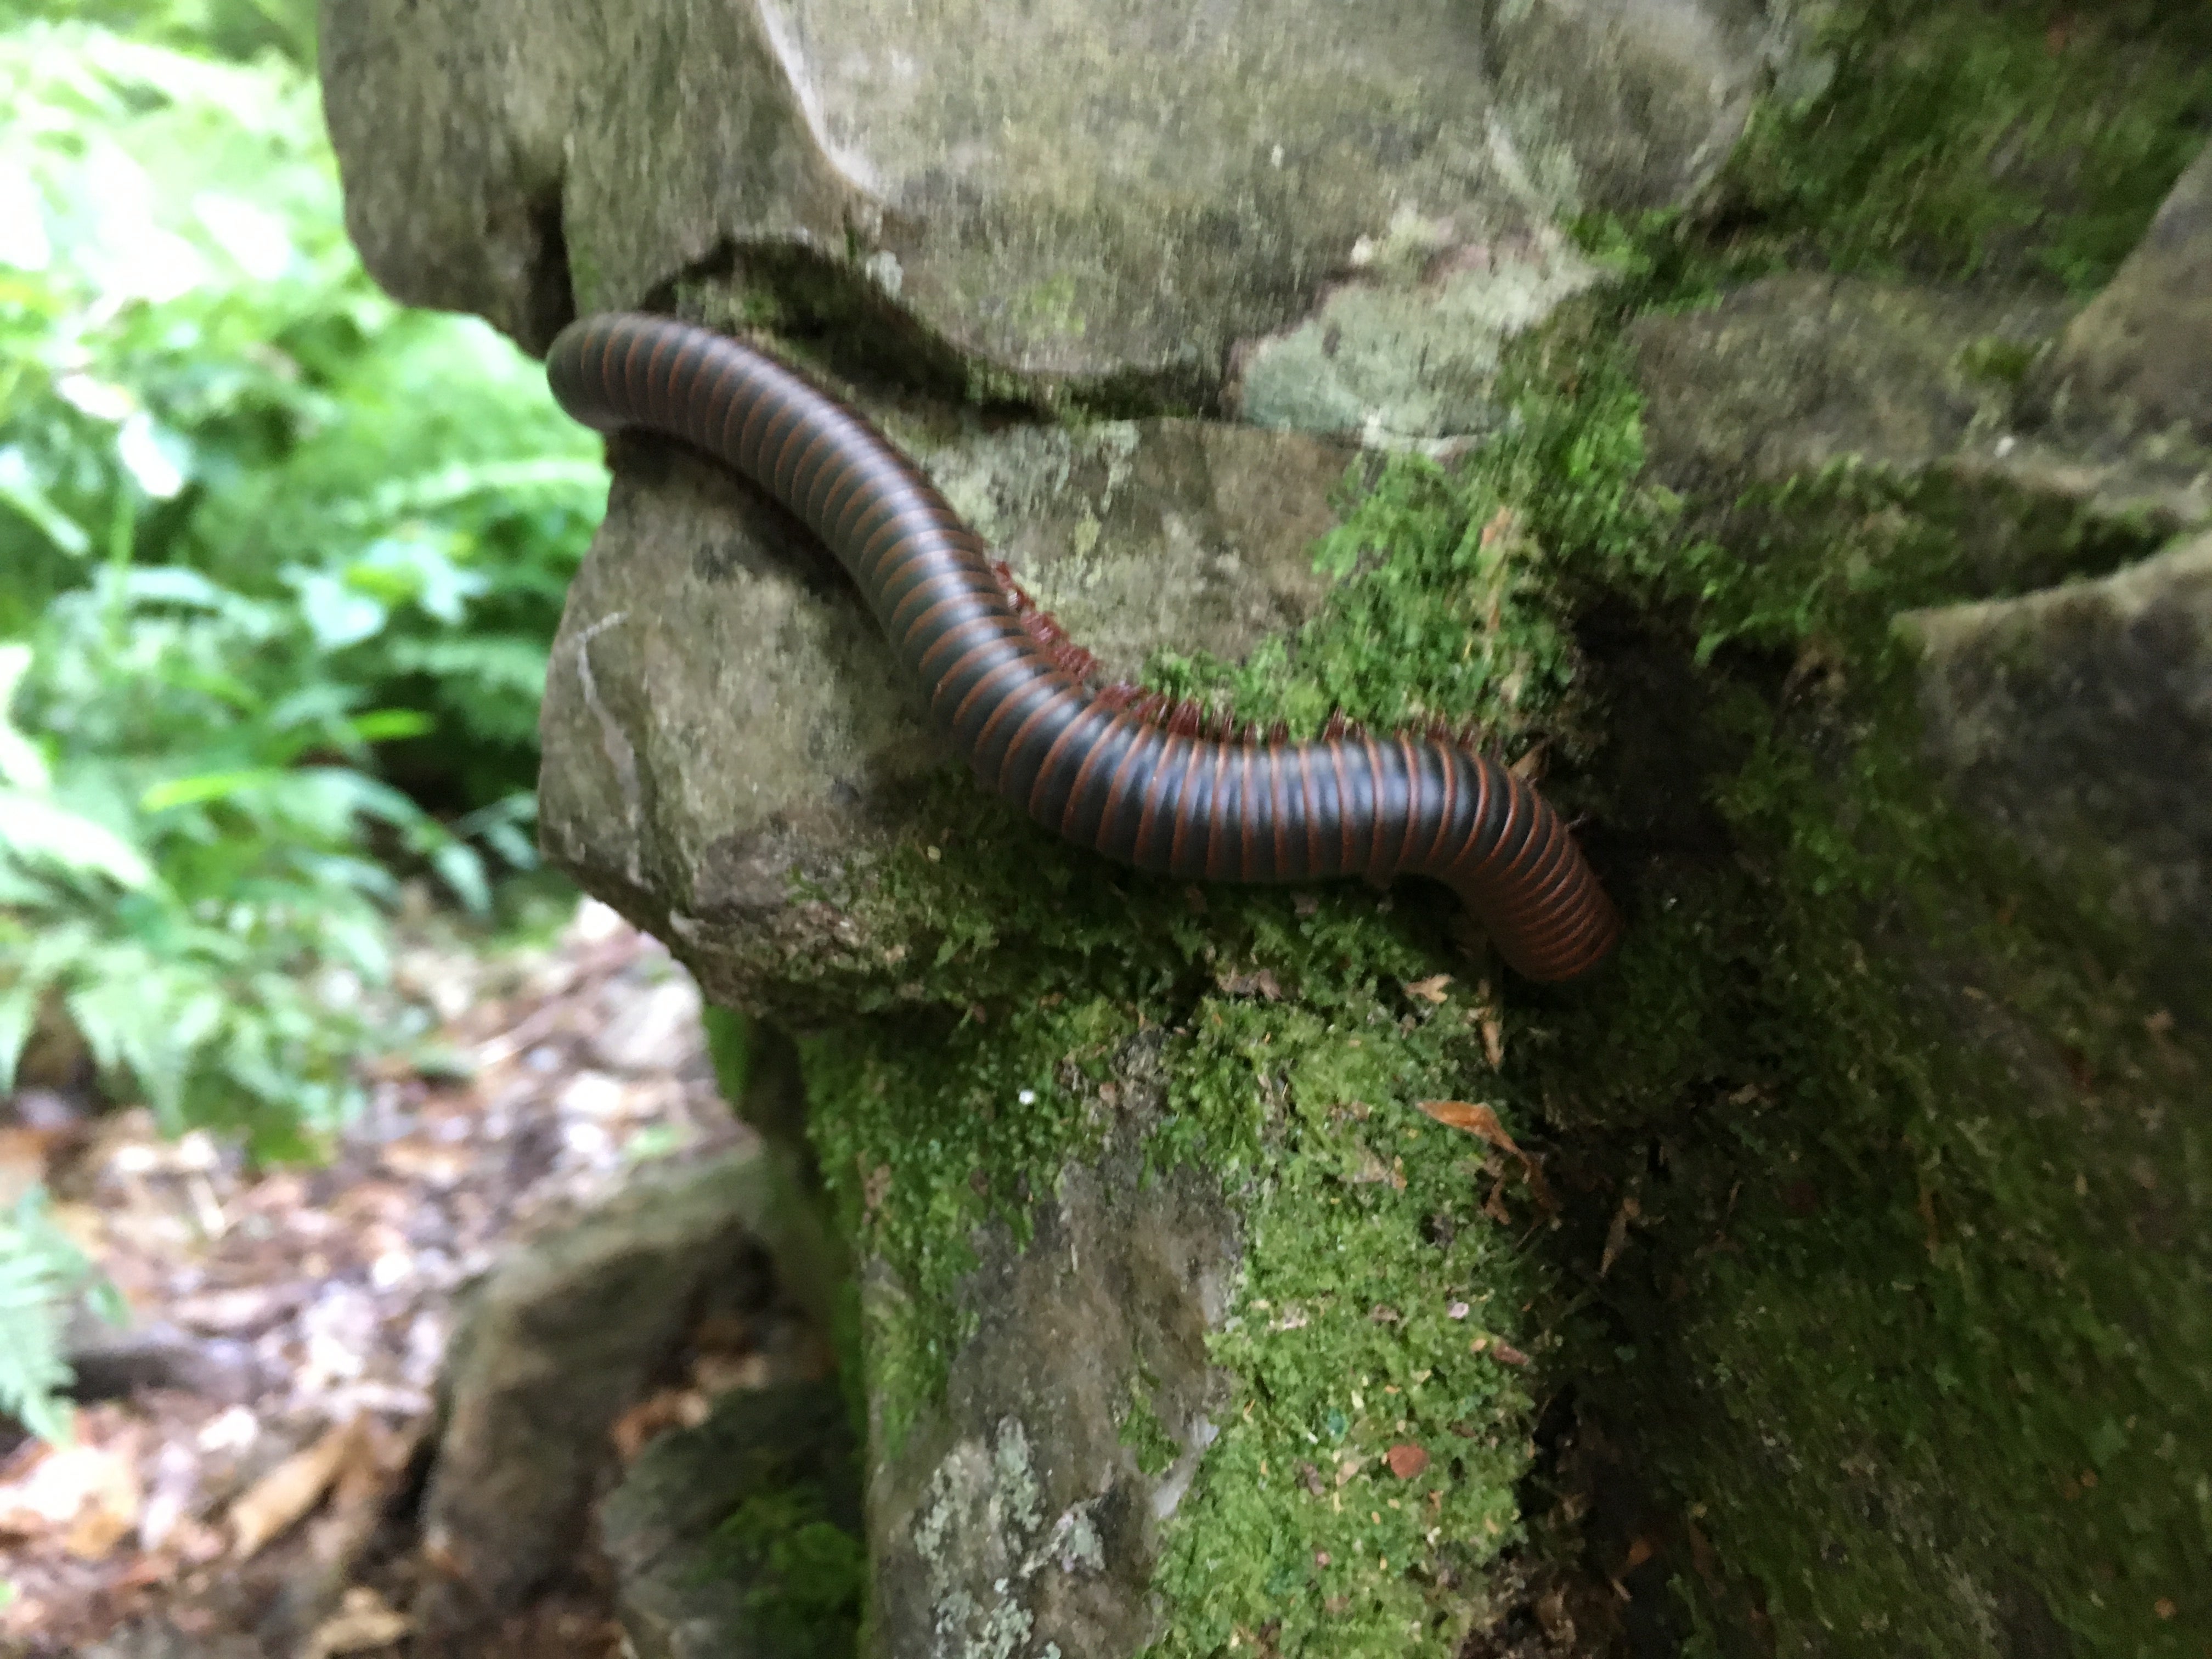 Critter along the trail (millipede)